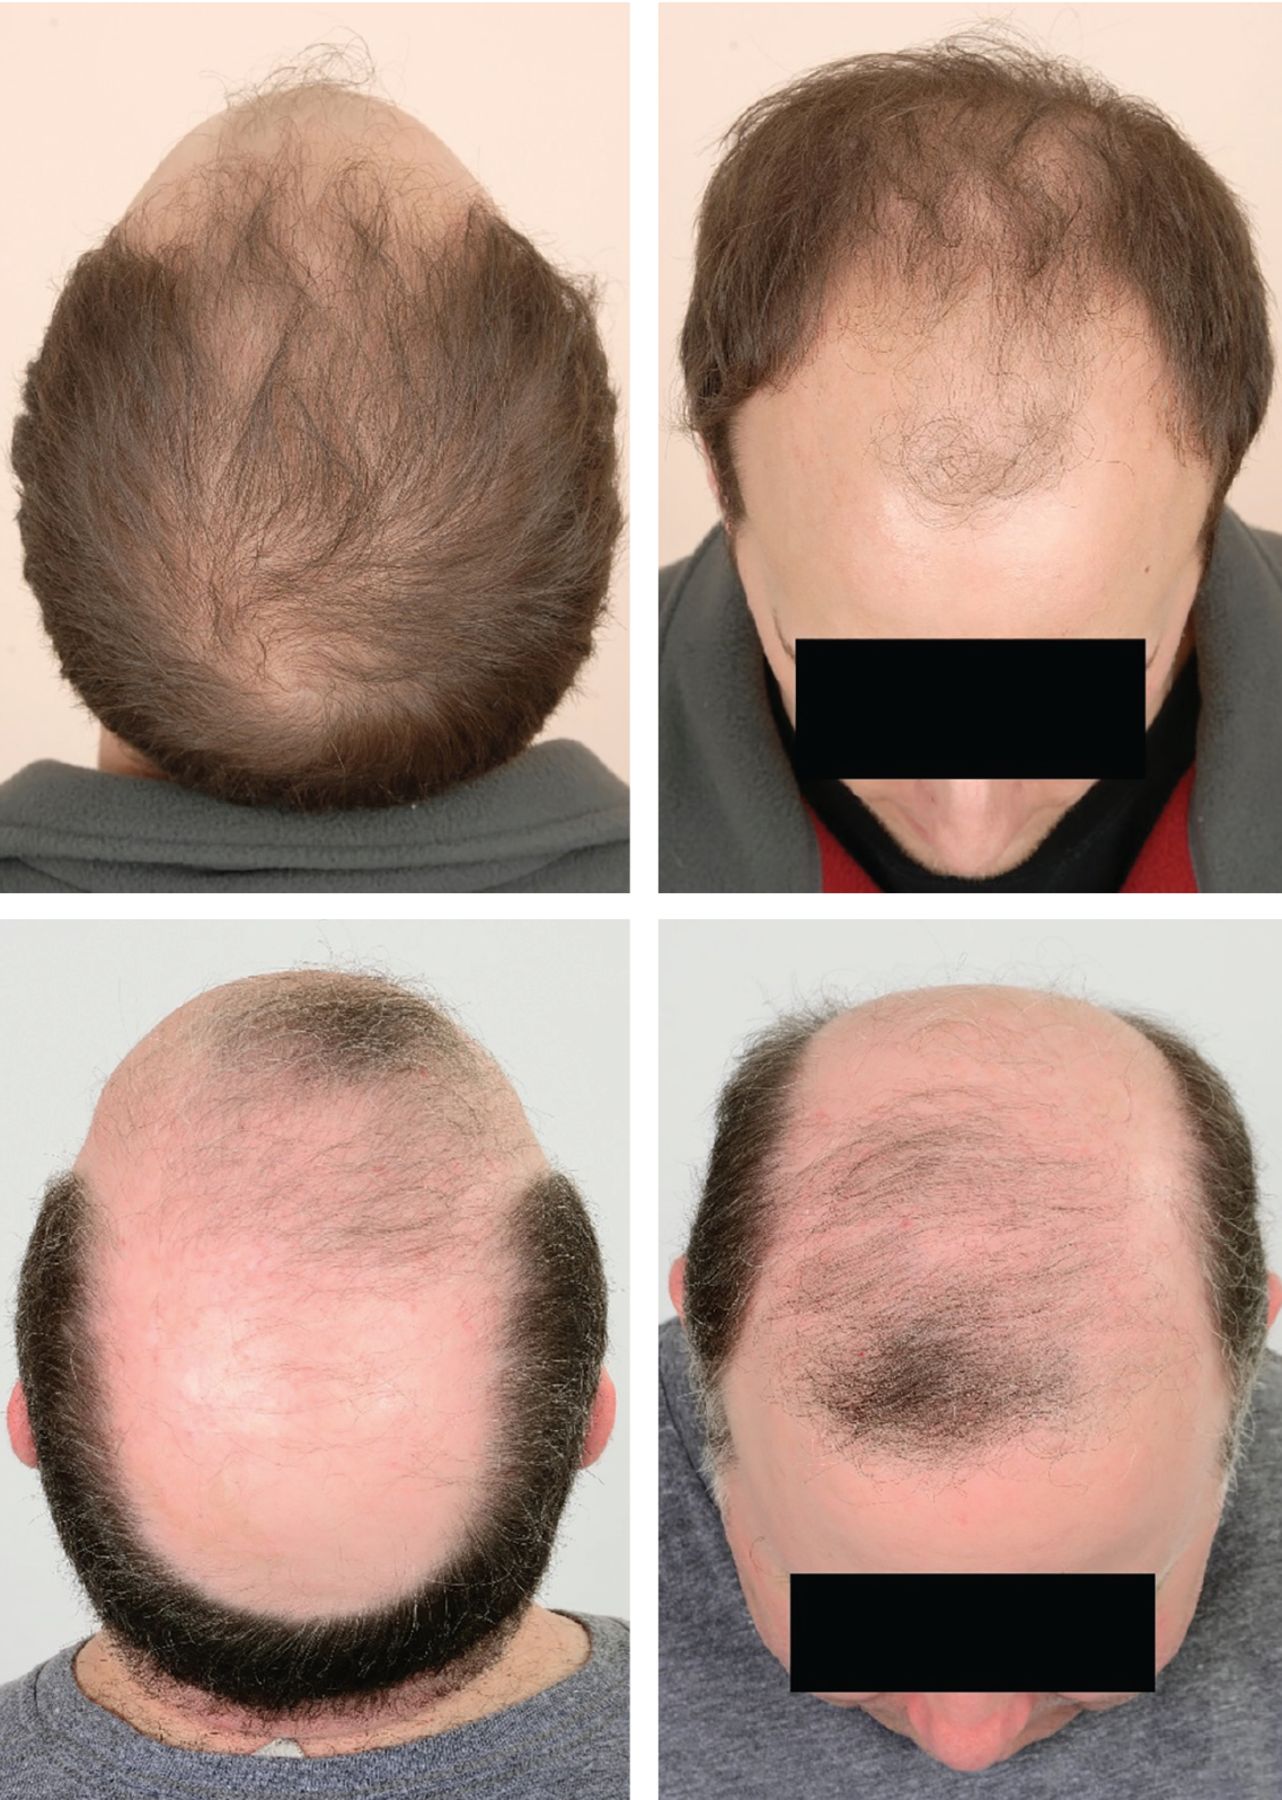 Male Pattern Baldness: Causes, Stages &#038; Treatment Options, Wimpole Clinic